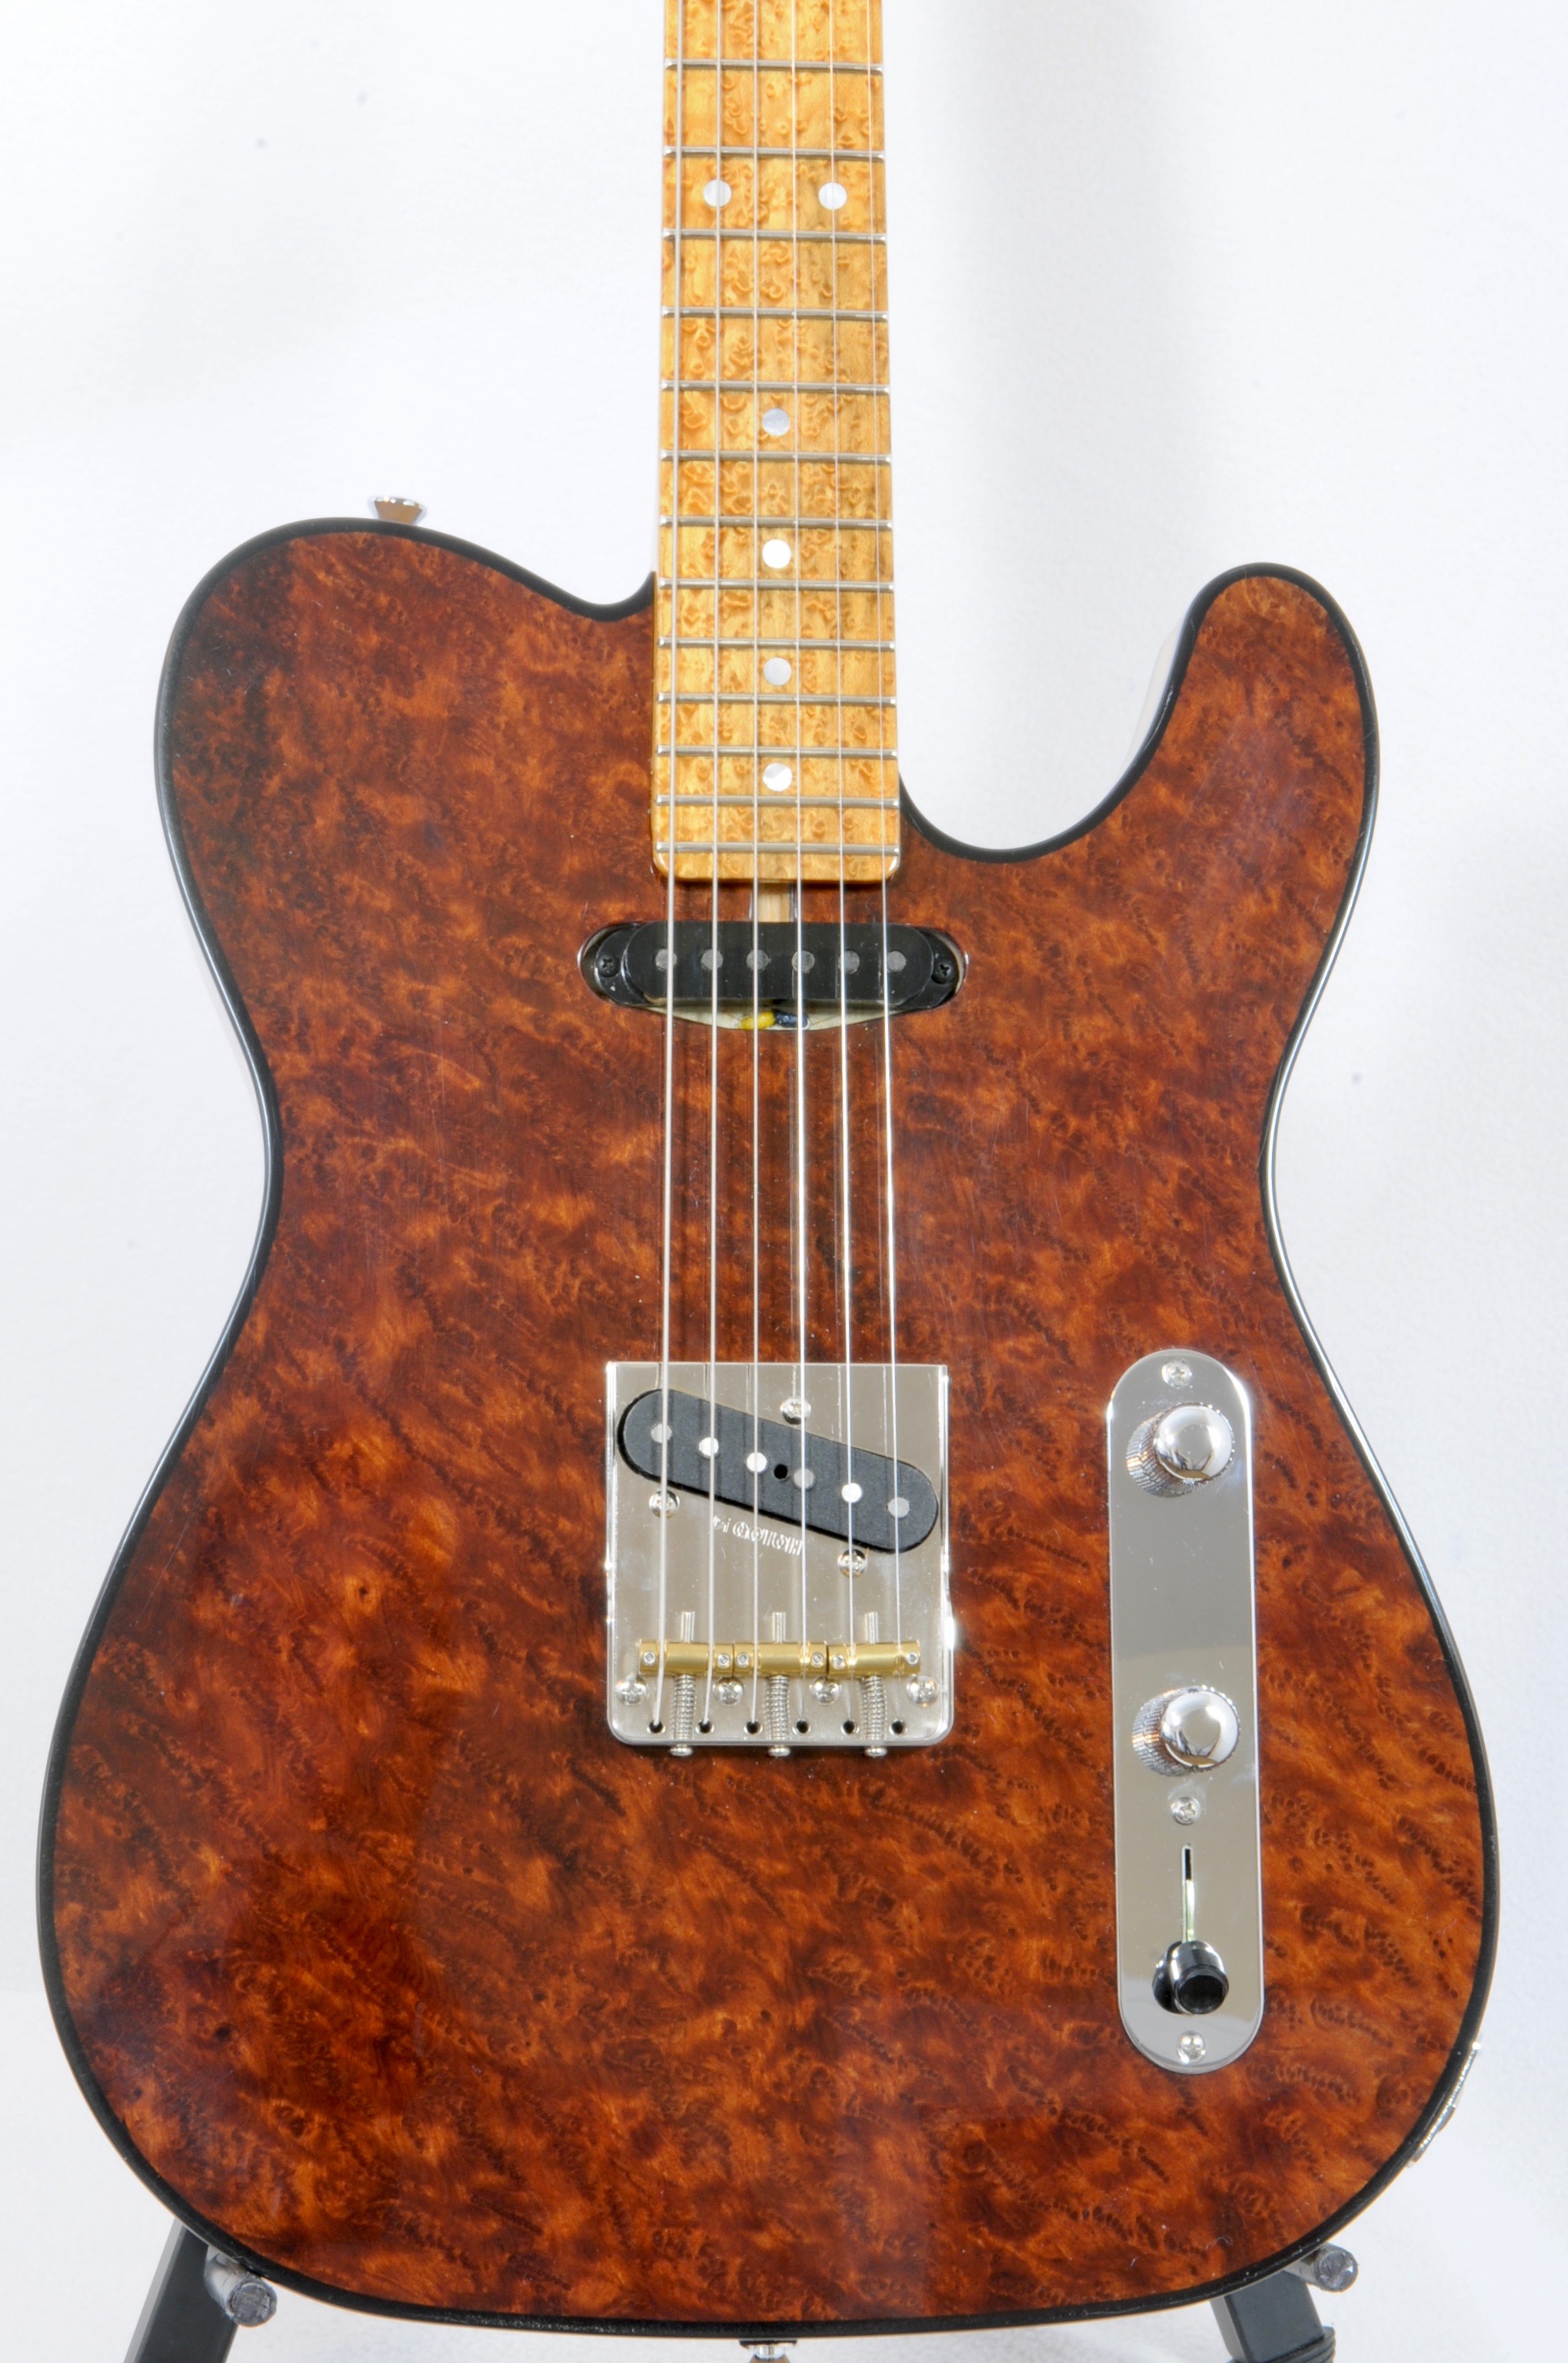 2018 Holloway Tele Custom :  HALL-OF-FAME WOODS from Larry Wysocki Library